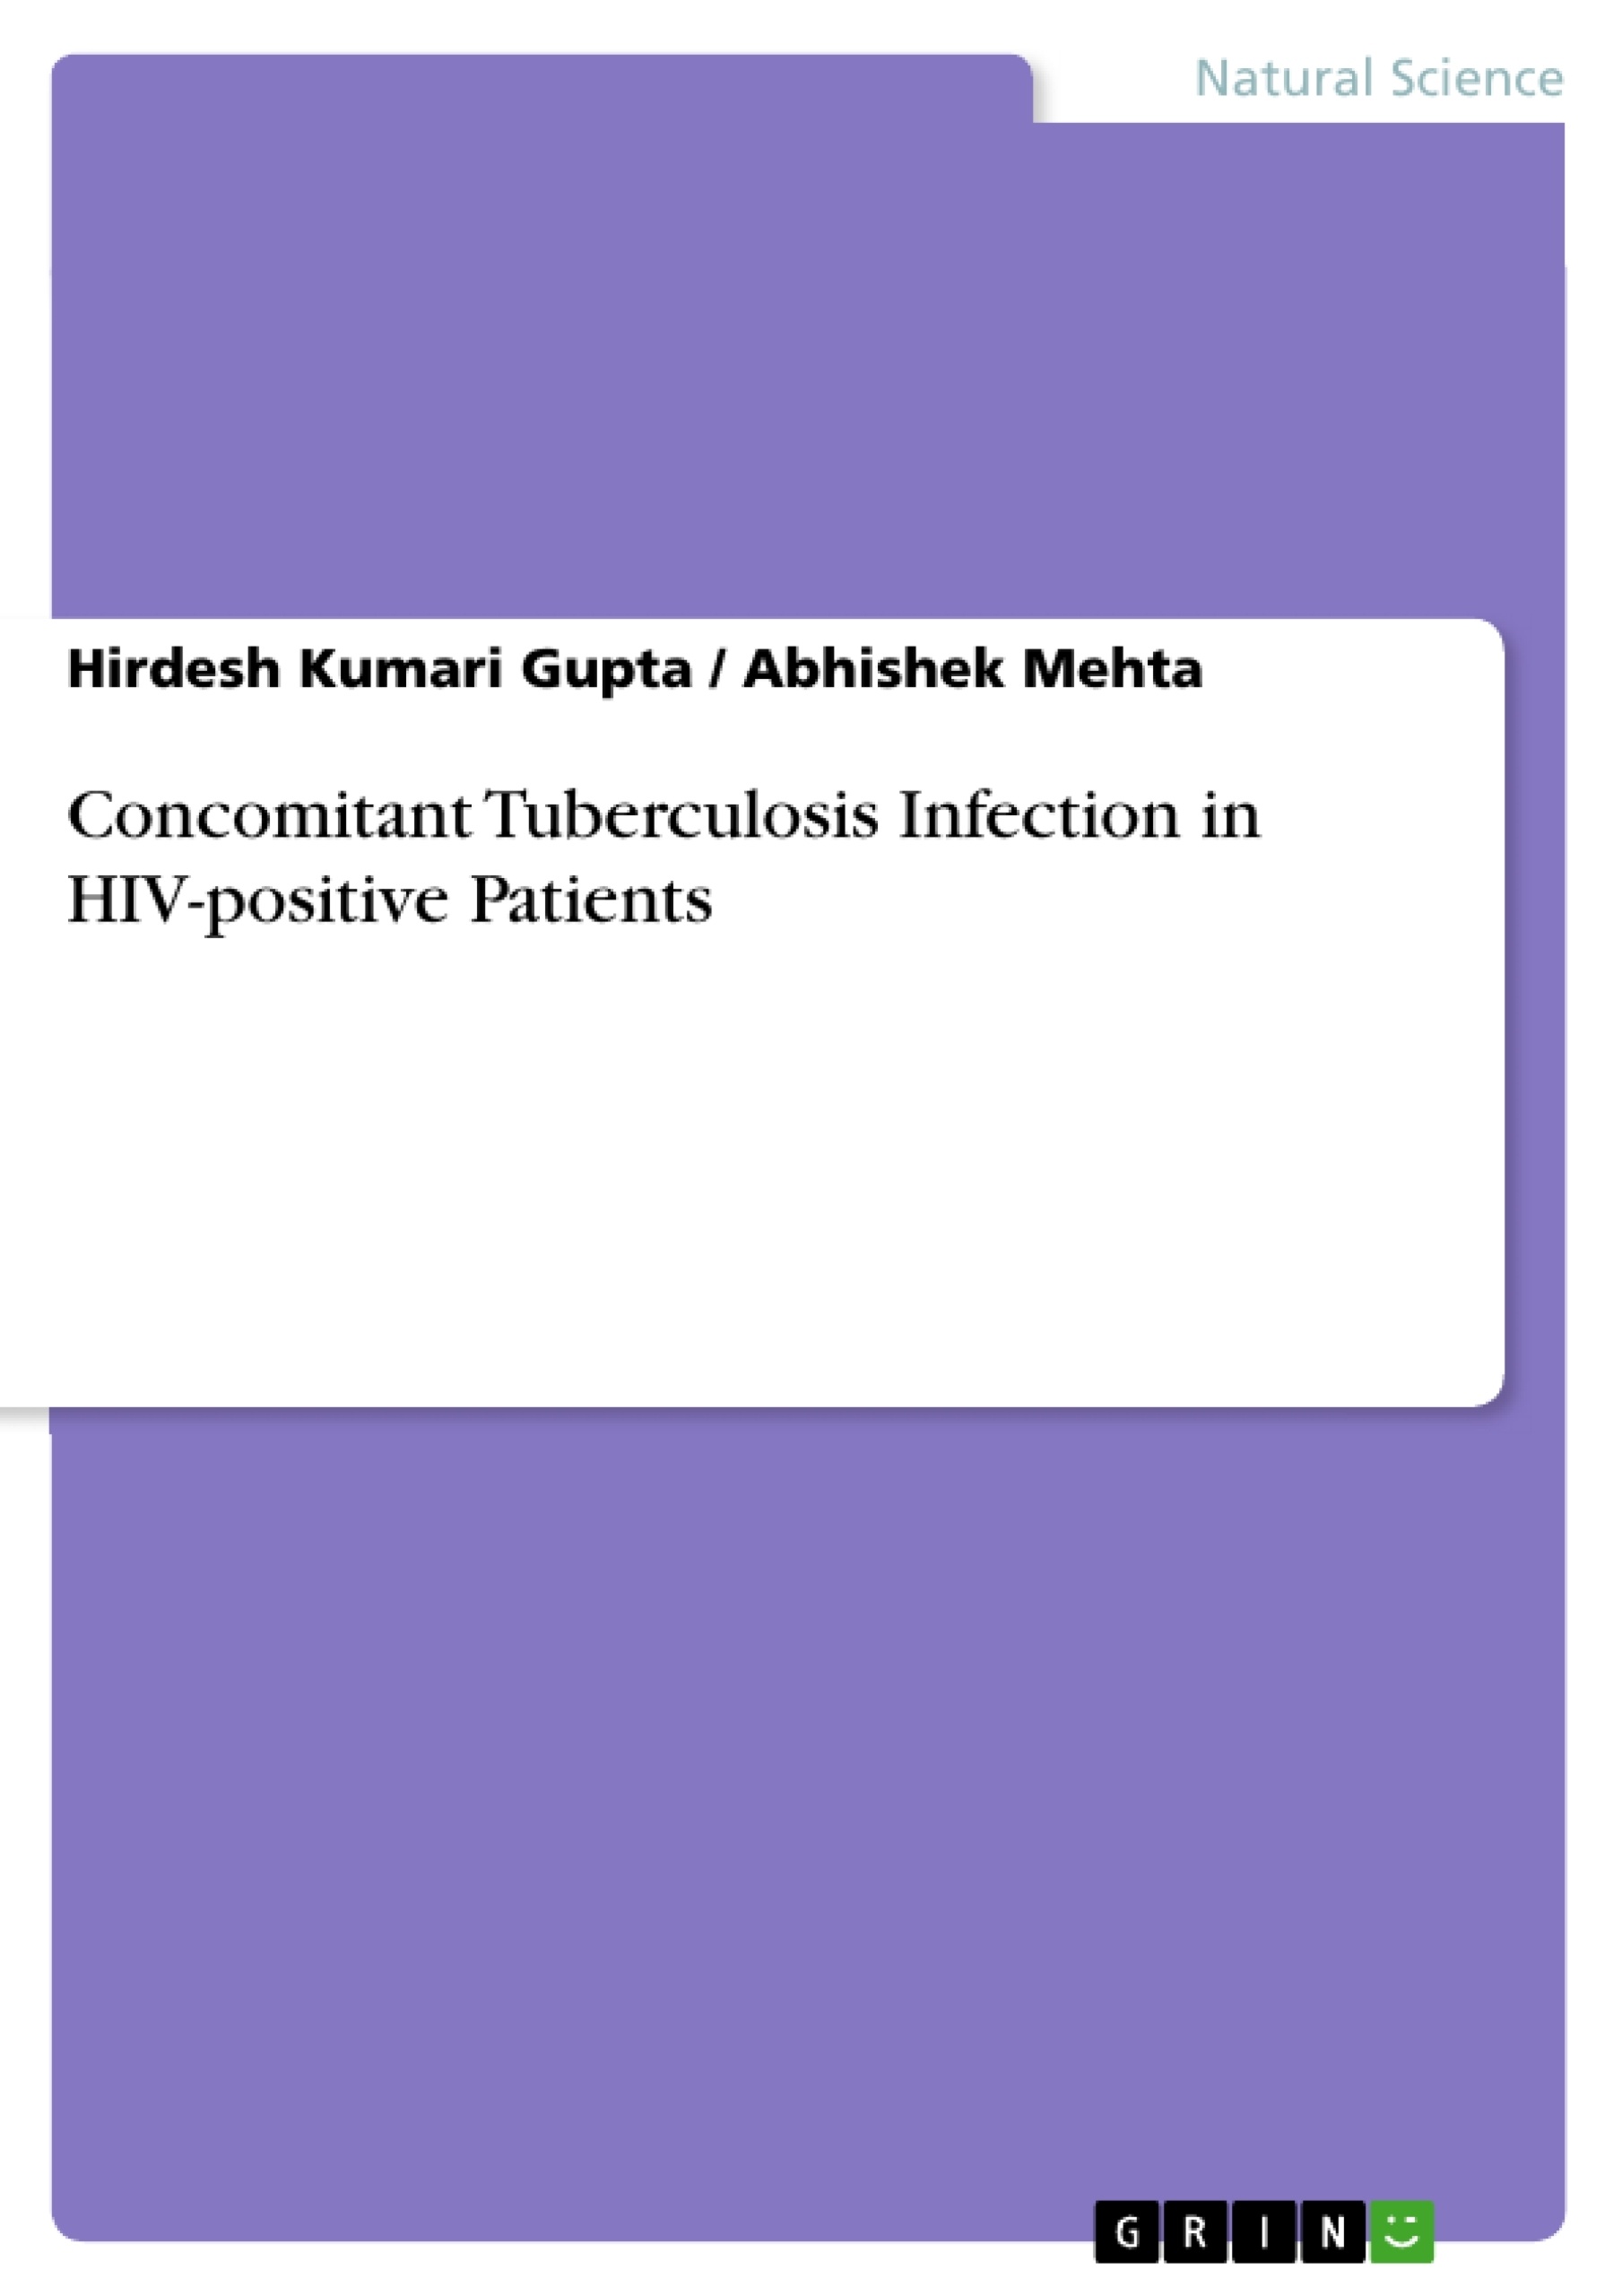 Title: Concomitant Tuberculosis Infection in HIV-positive Patients